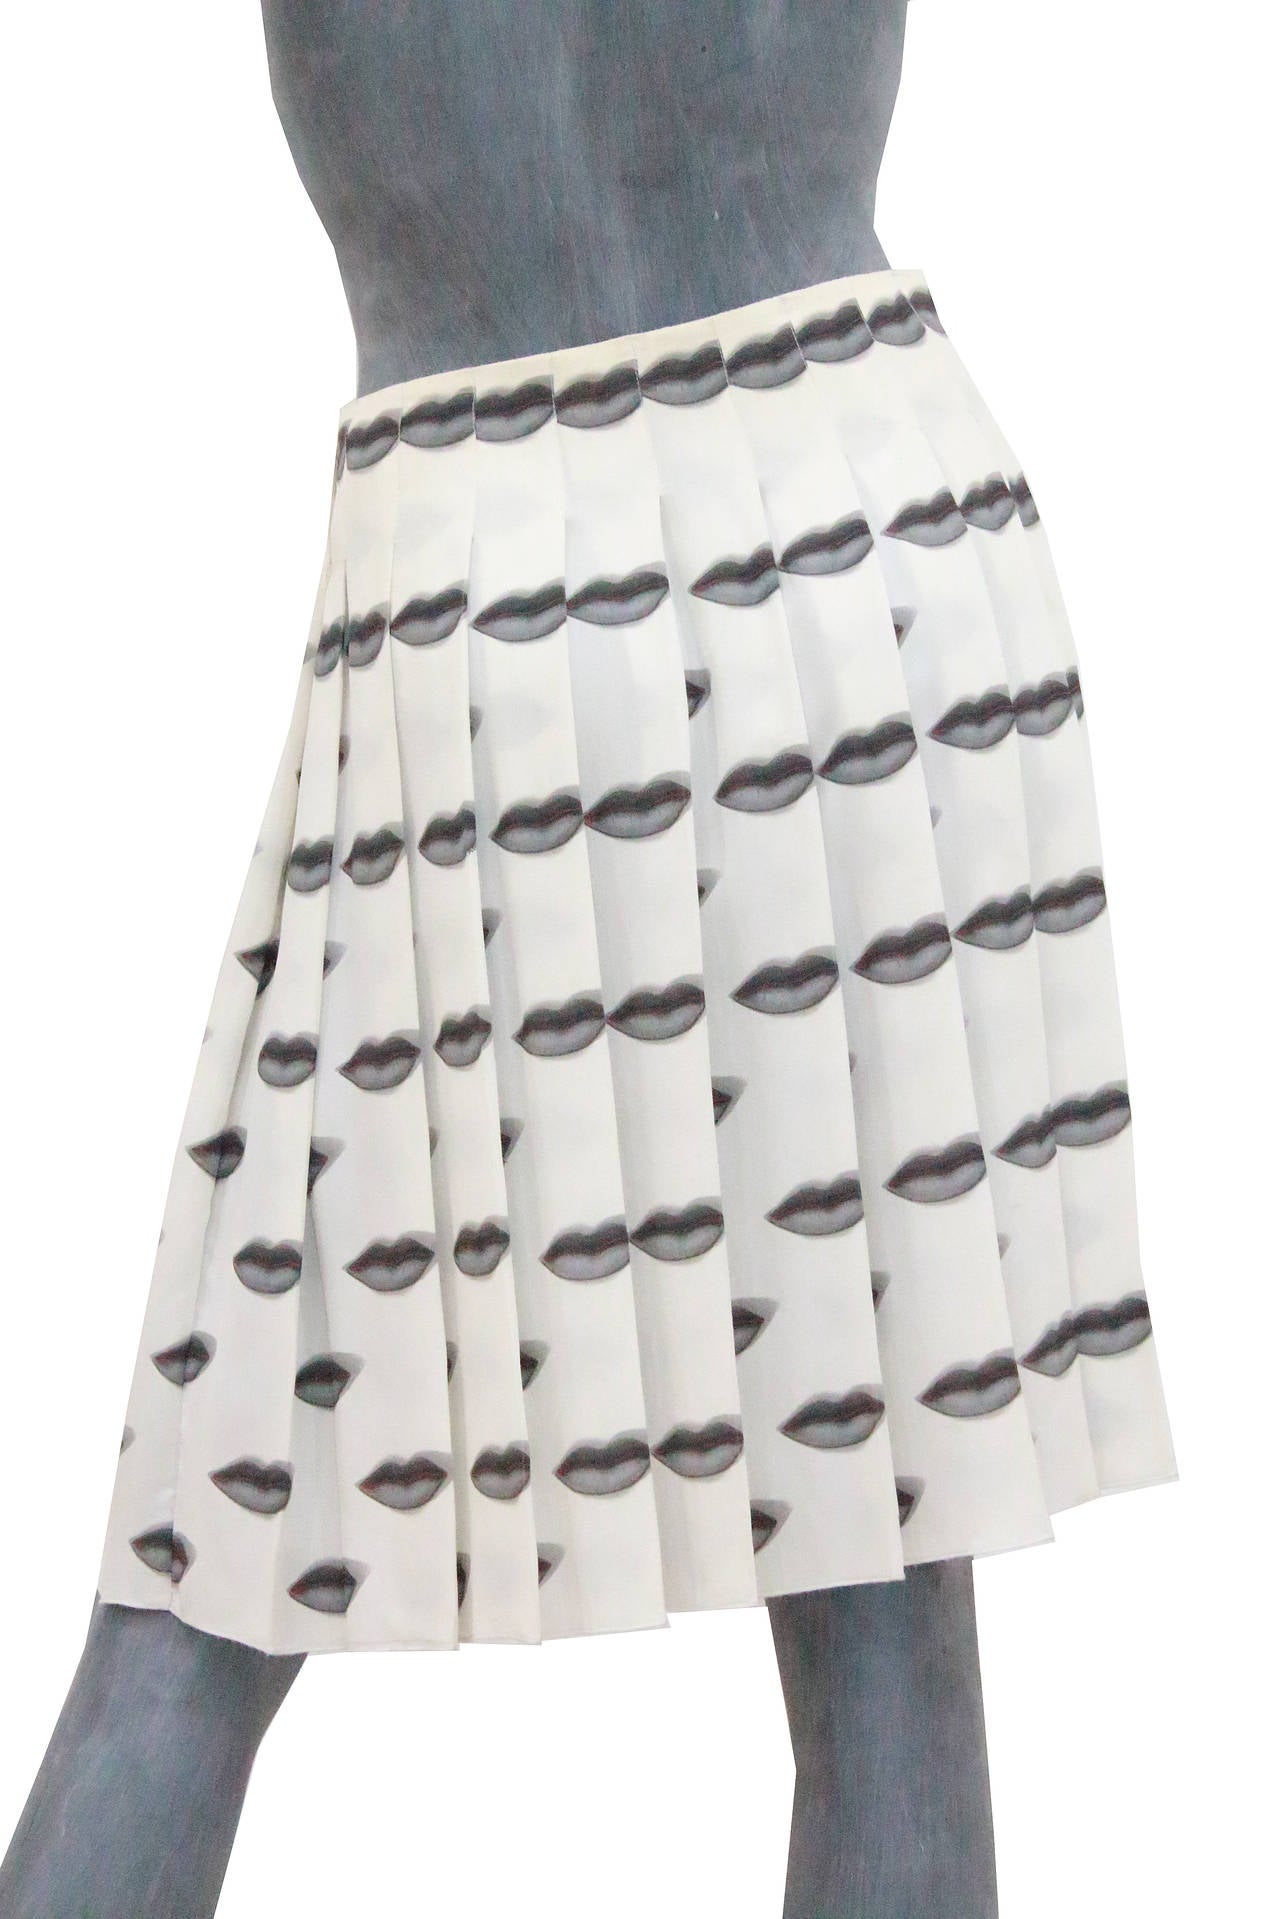 Fully pleated wrap skirt by Prada featuring the iconic lip print which was highly documented at the time. Made of 100% Silk. 

Size 40